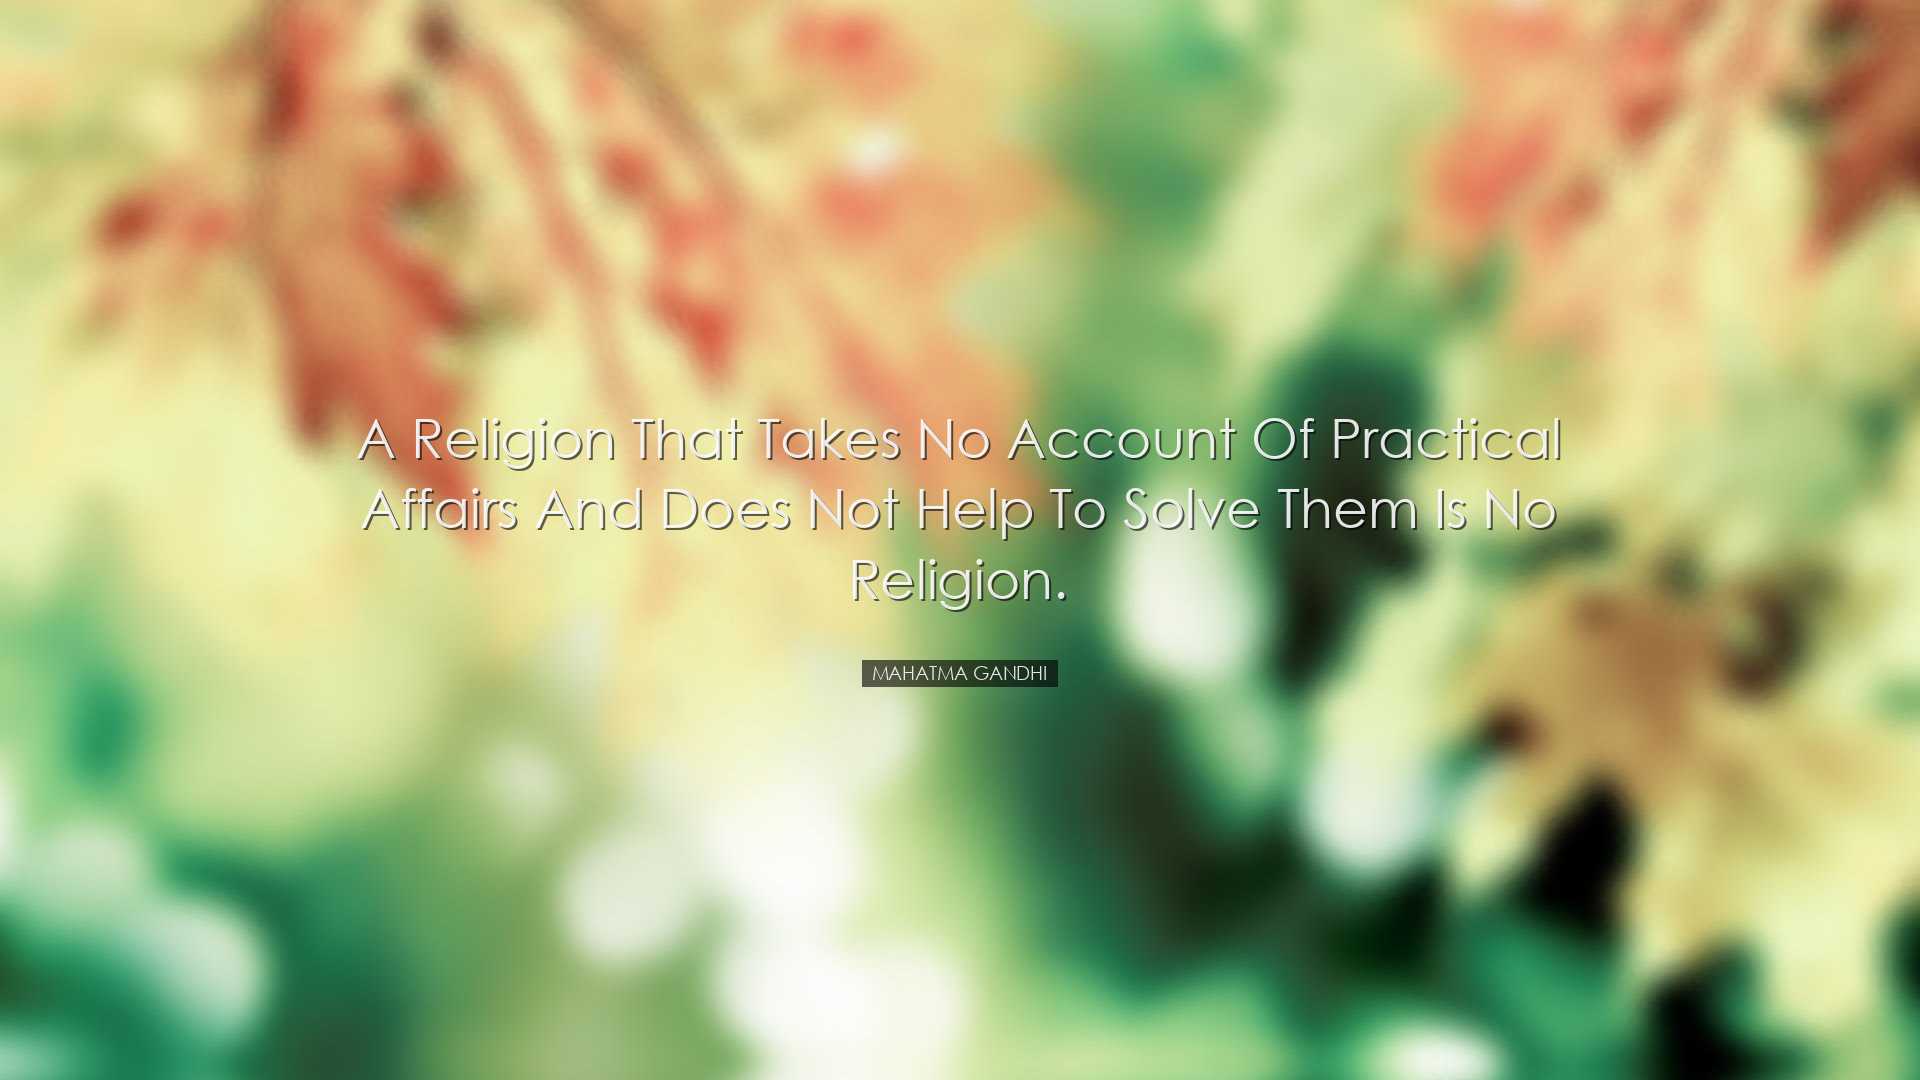 A religion that takes no account of practical affairs and does not